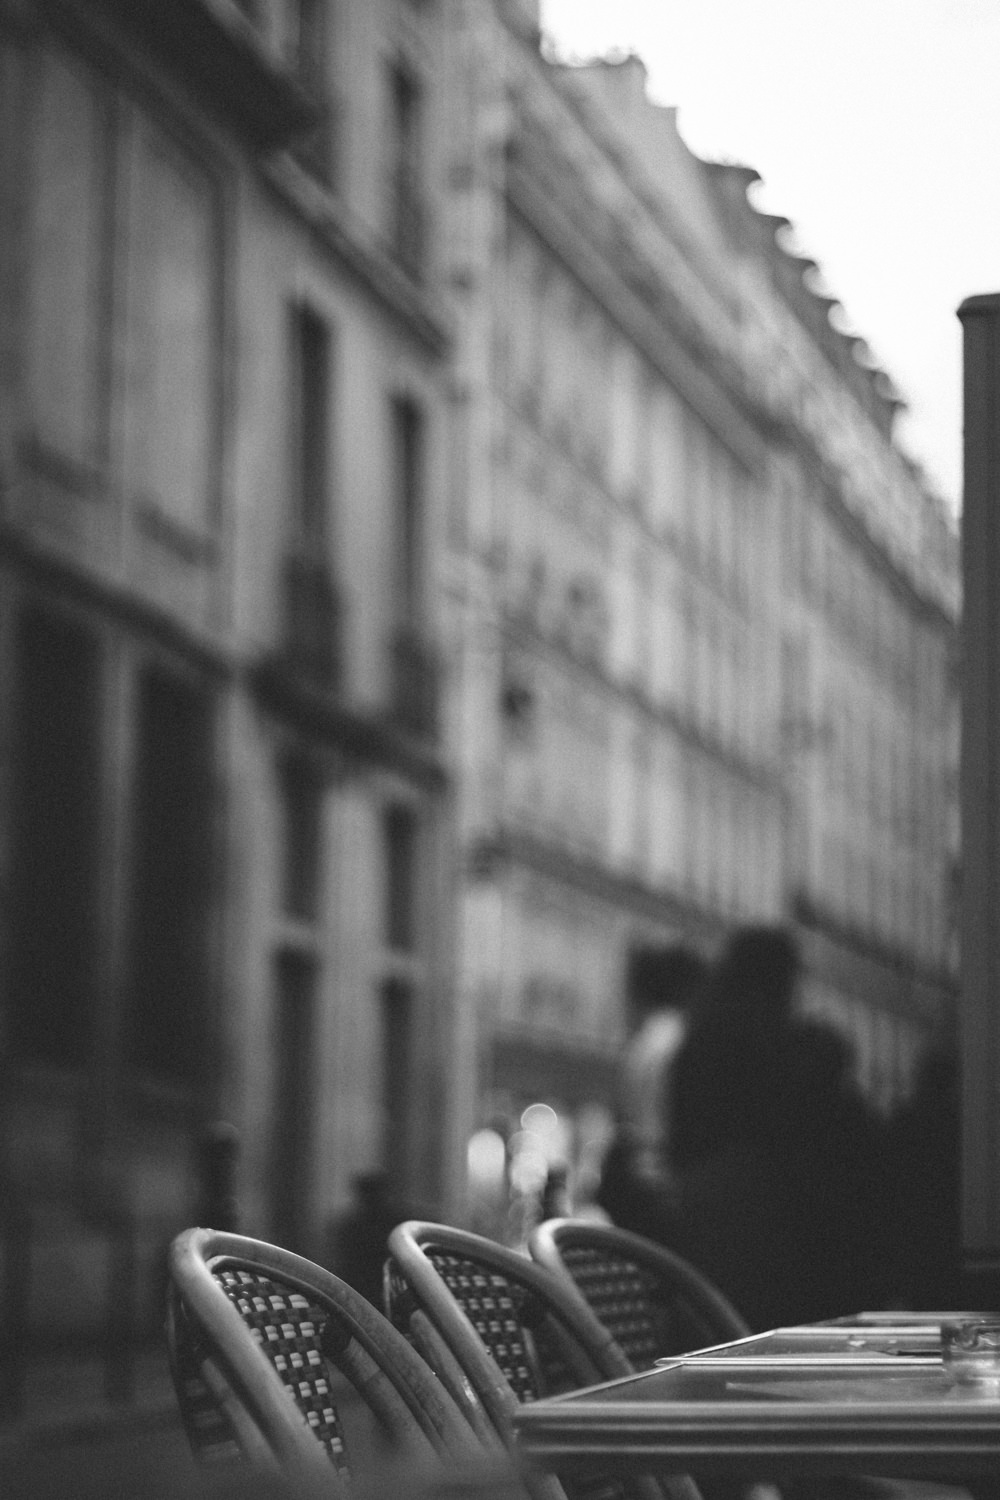 Paris France in black and white